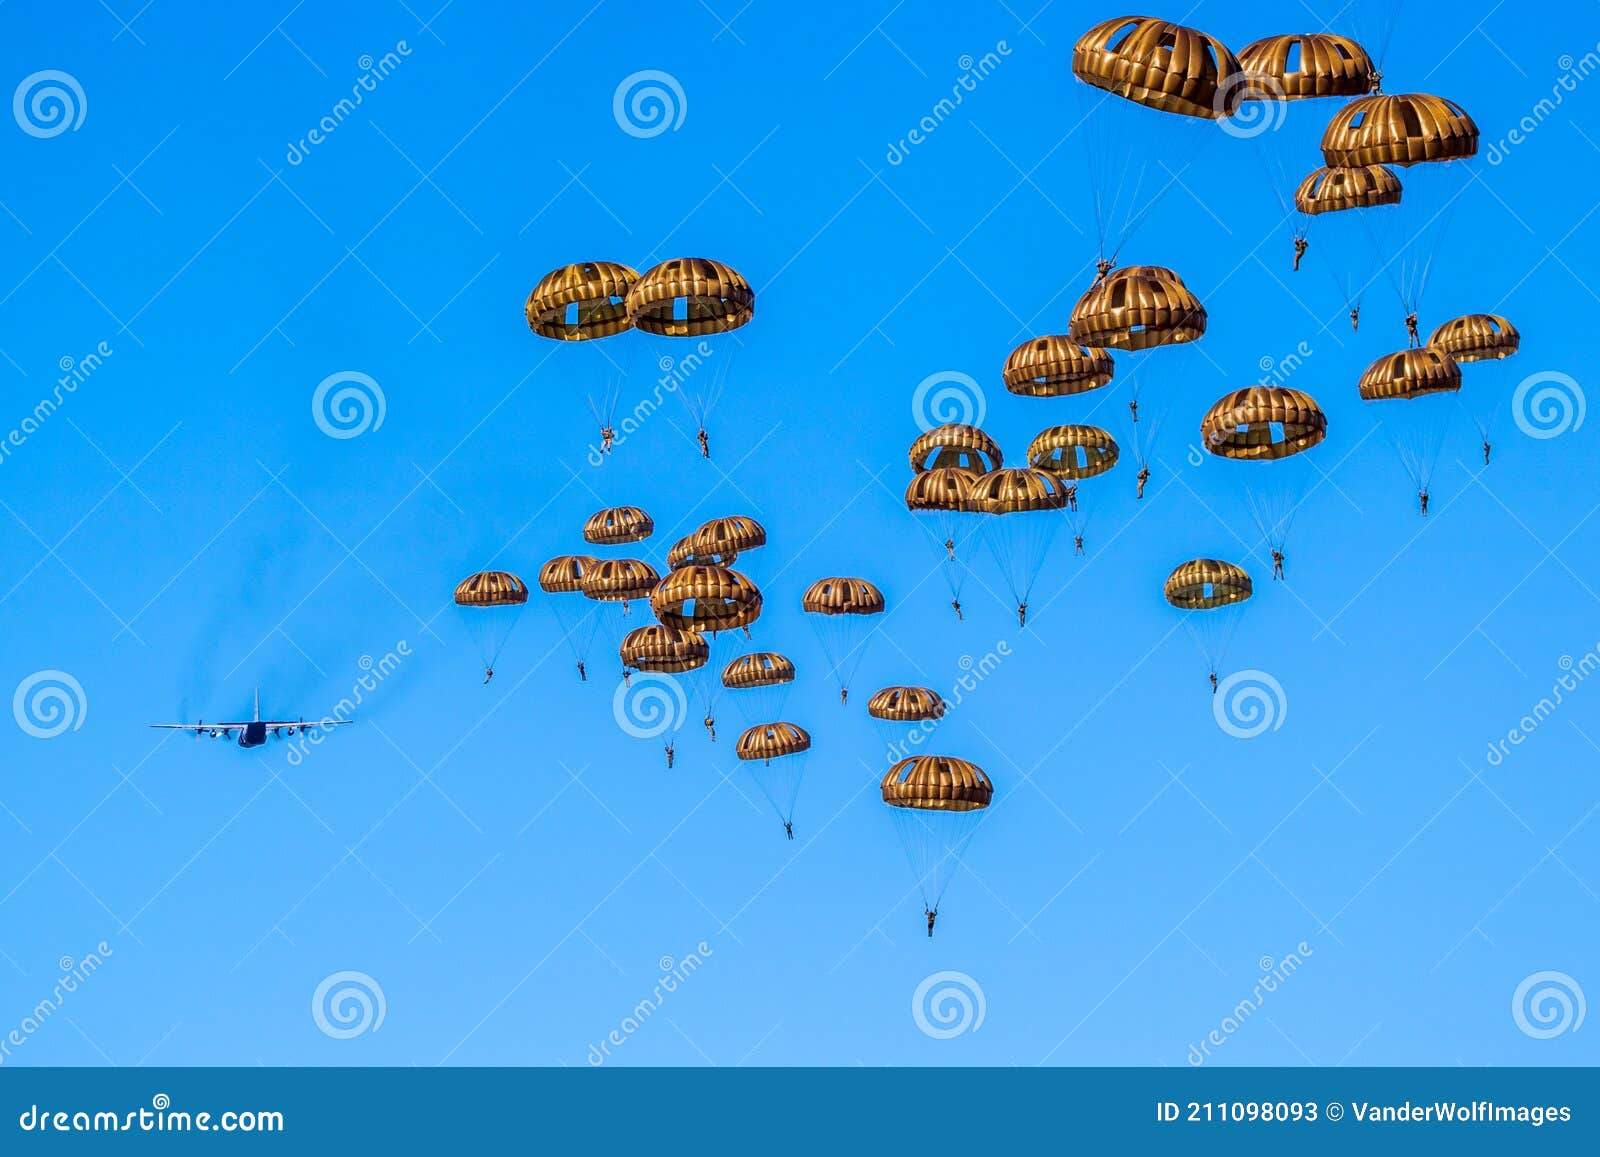 military parachutist paratroopers parachute jumping out of a air force planes on a clear blue sky day